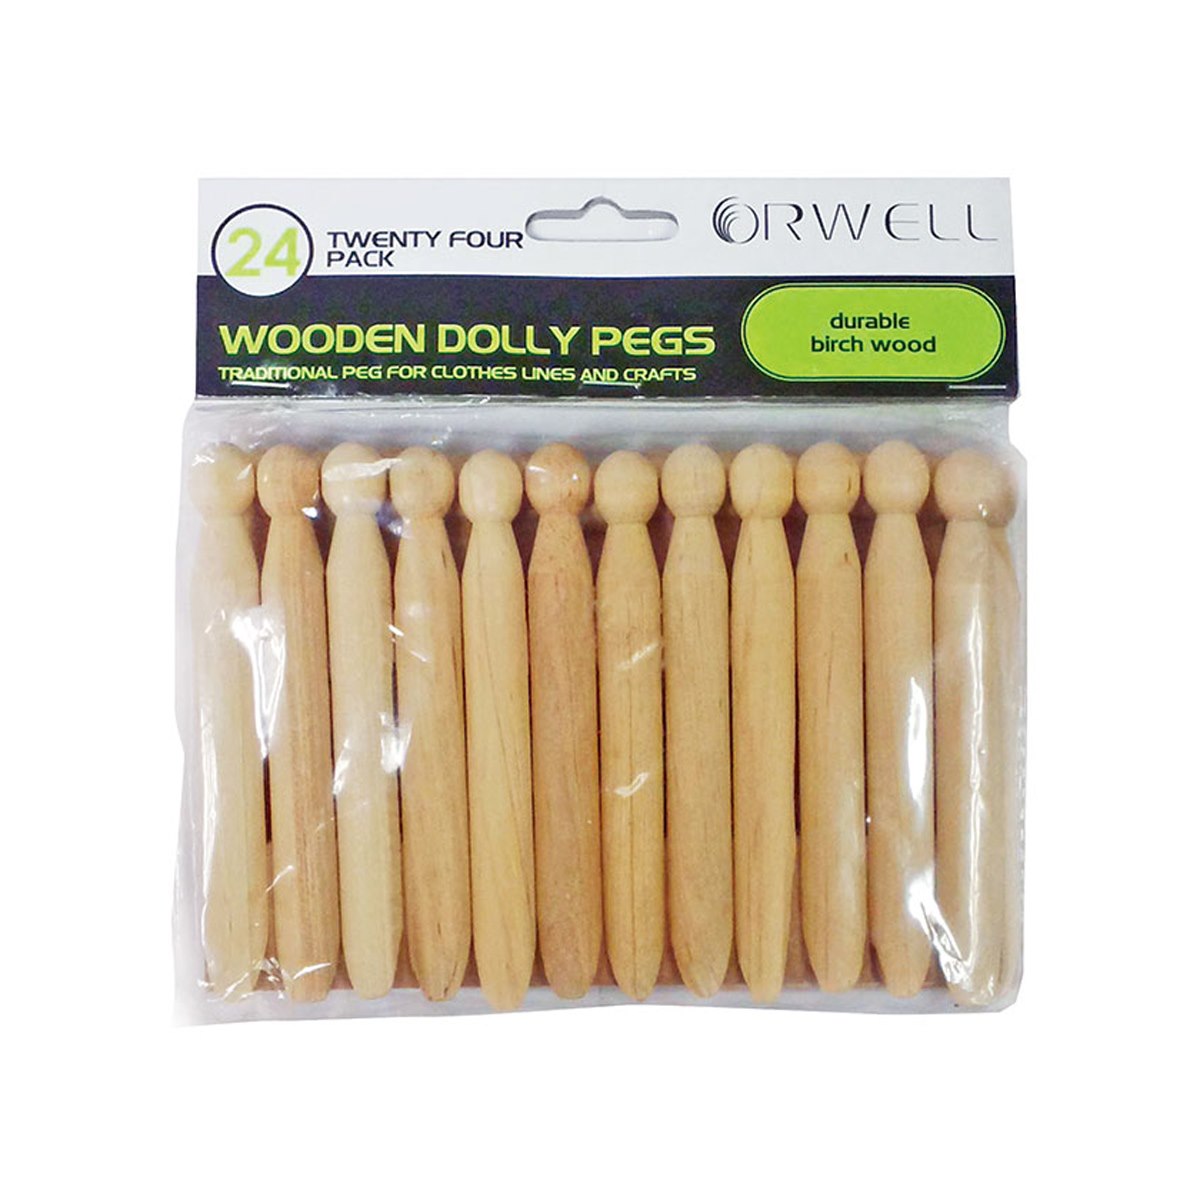 Orwell Traditional Wooden Dolly Pegs 24 Pack